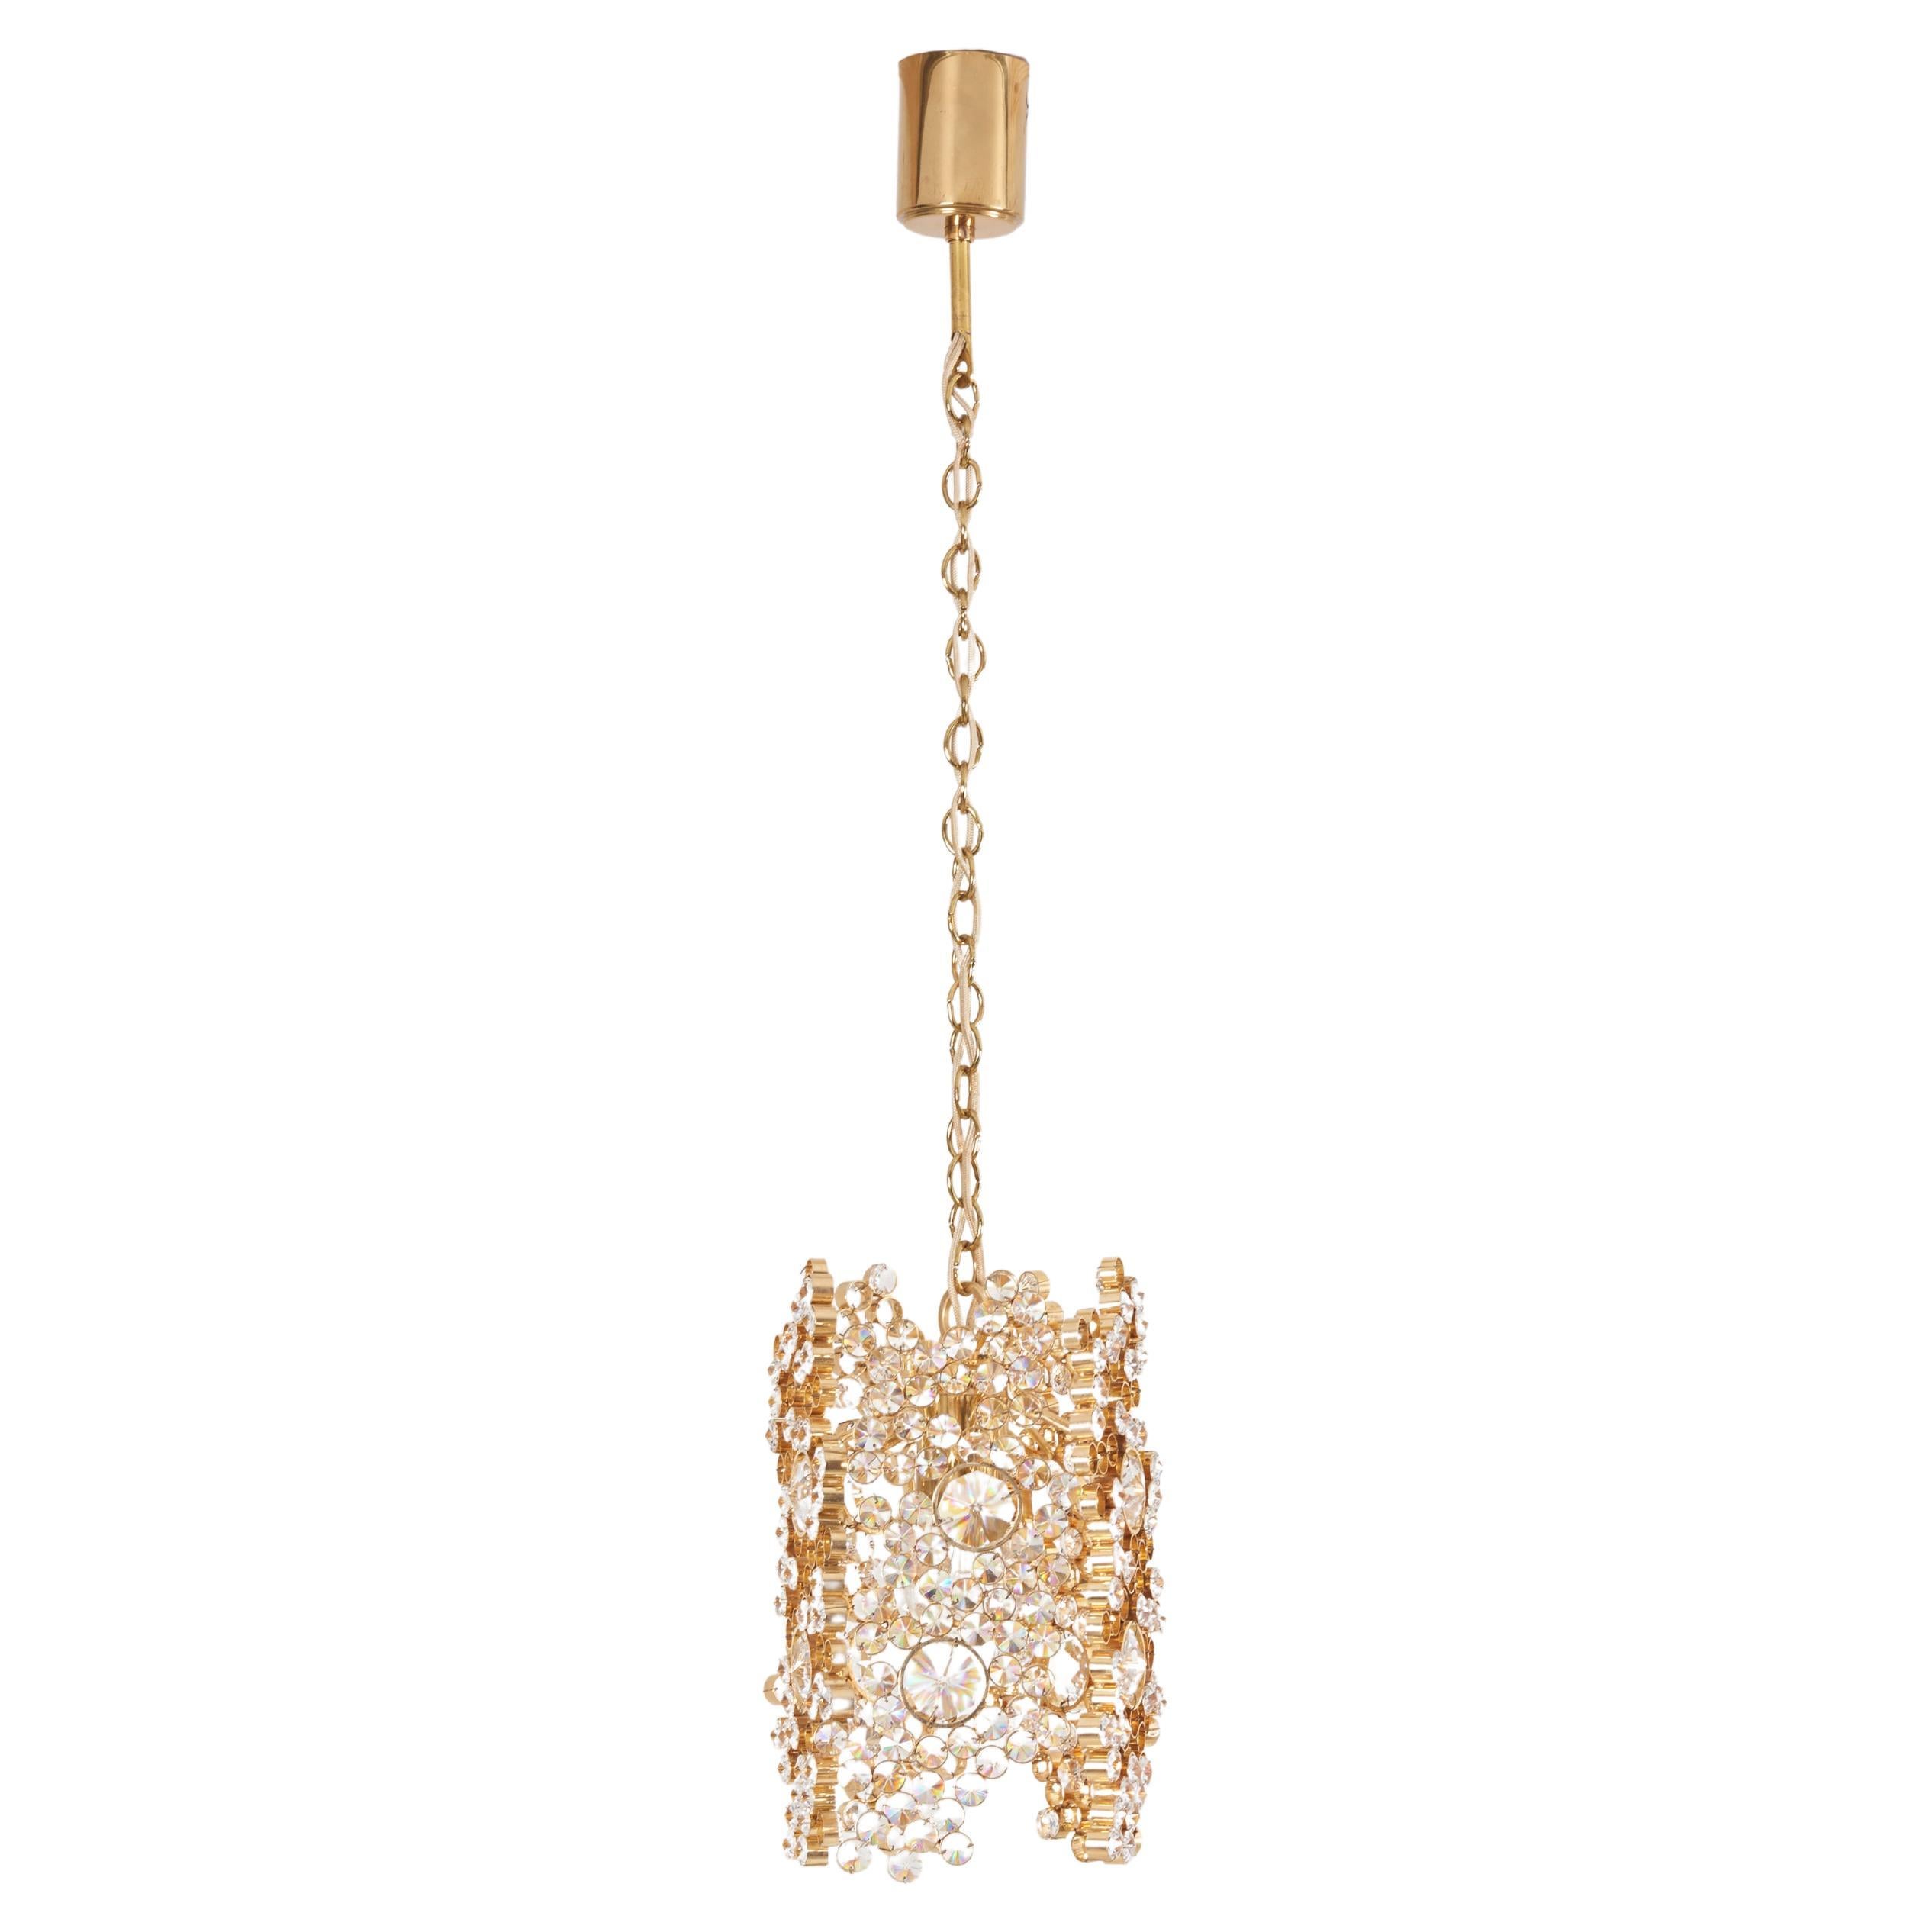 Palwa Gilded Brass and Crystal Glass Encrusted Pendant Lamp